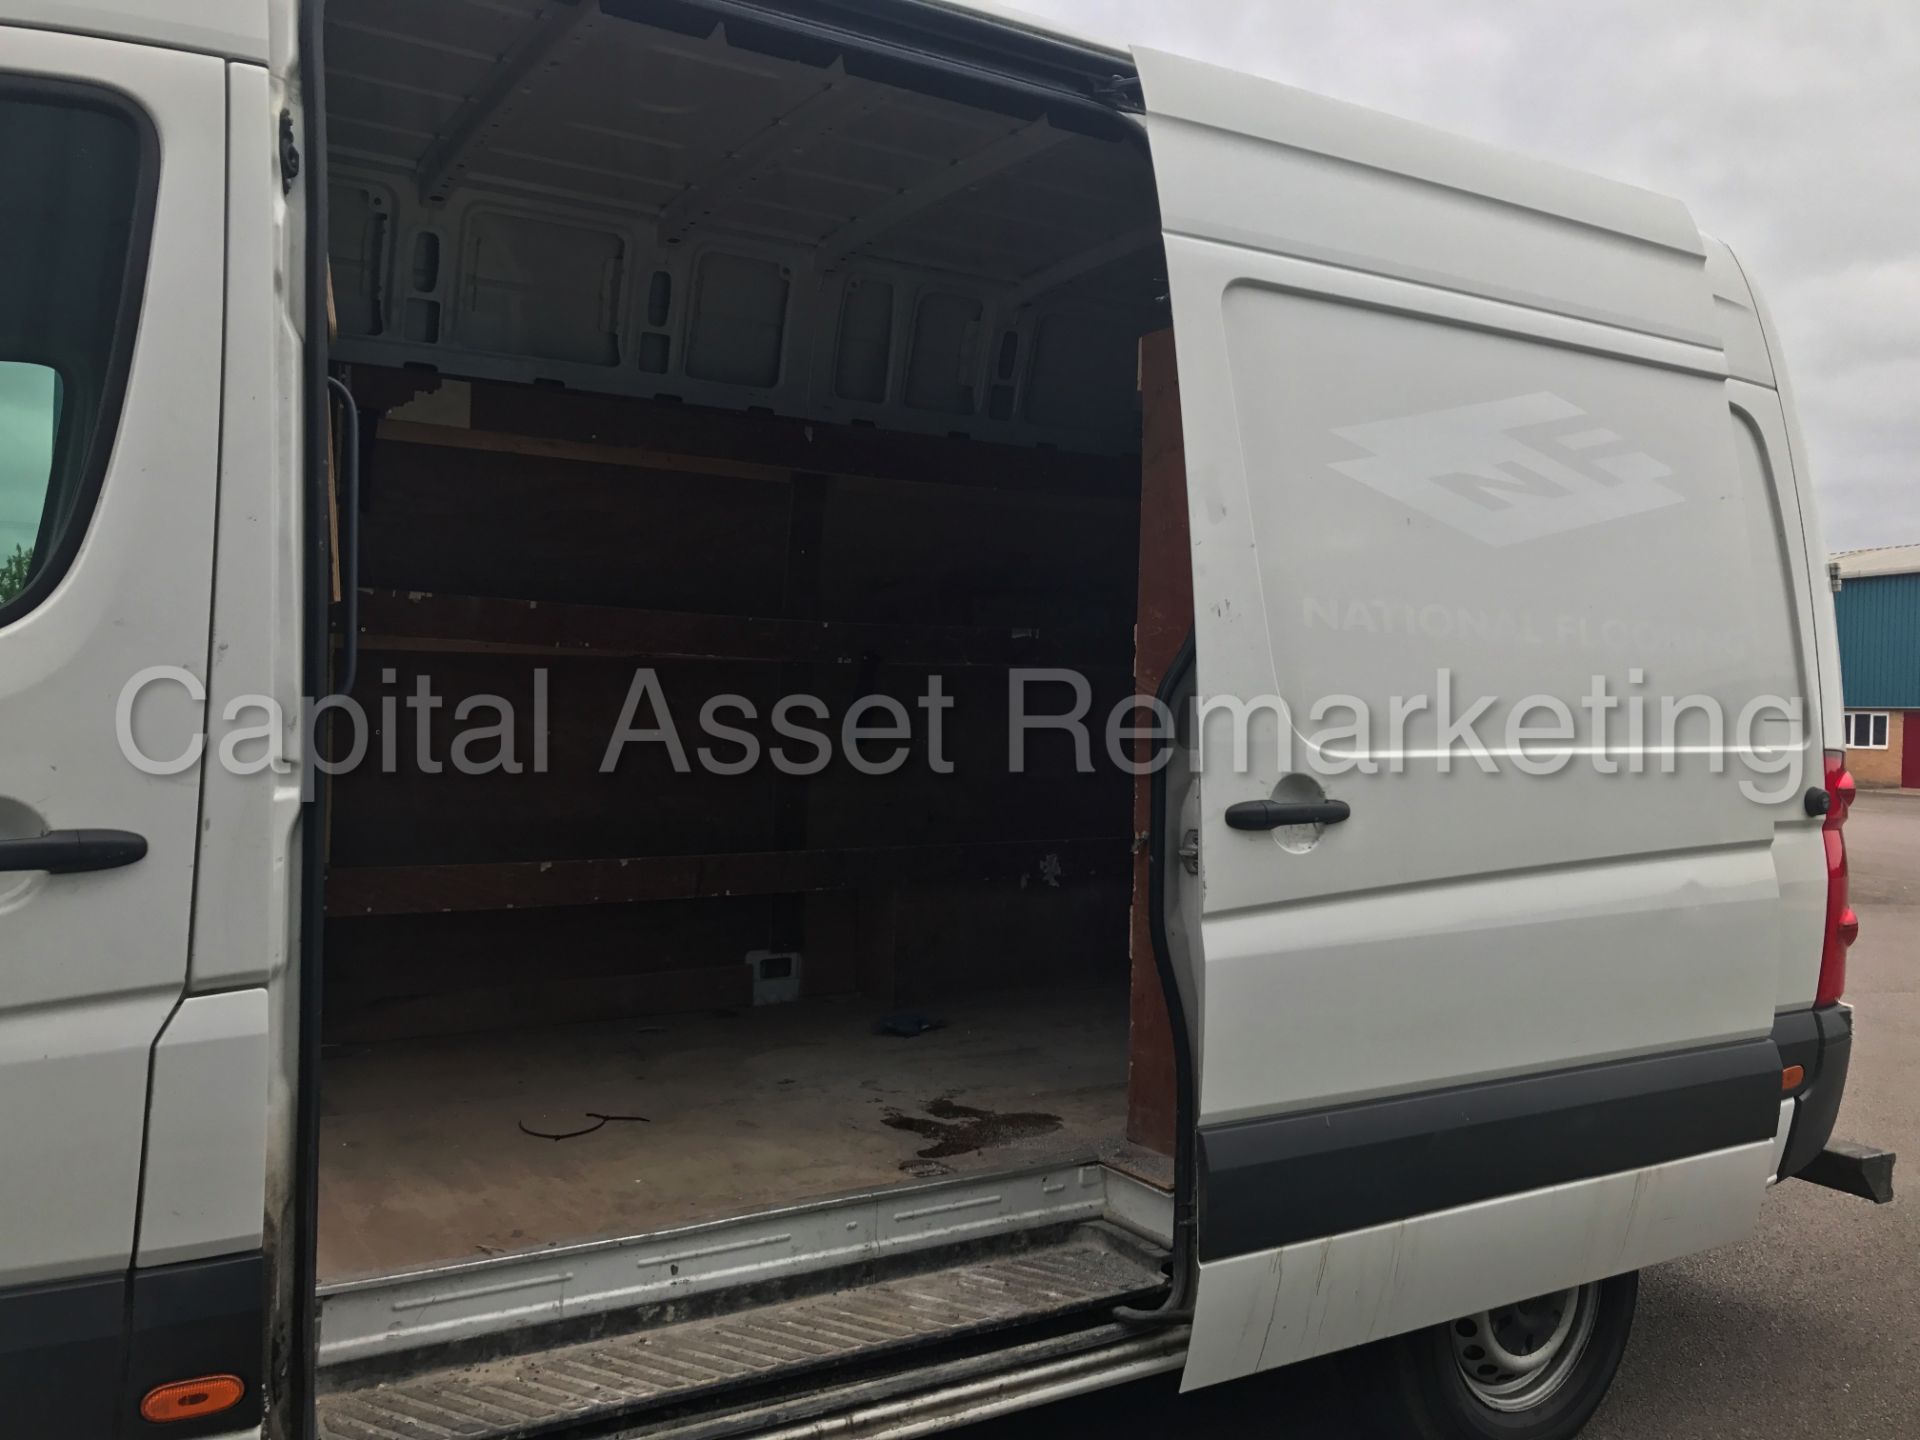 VOLKSWAGEN CRAFTER CR35 'MWB HI-ROOF' (2014) '2.0 TDI - 109 PS - 6 SPEED' *1 COMPANY OWNER FROM NEW* - Image 13 of 19